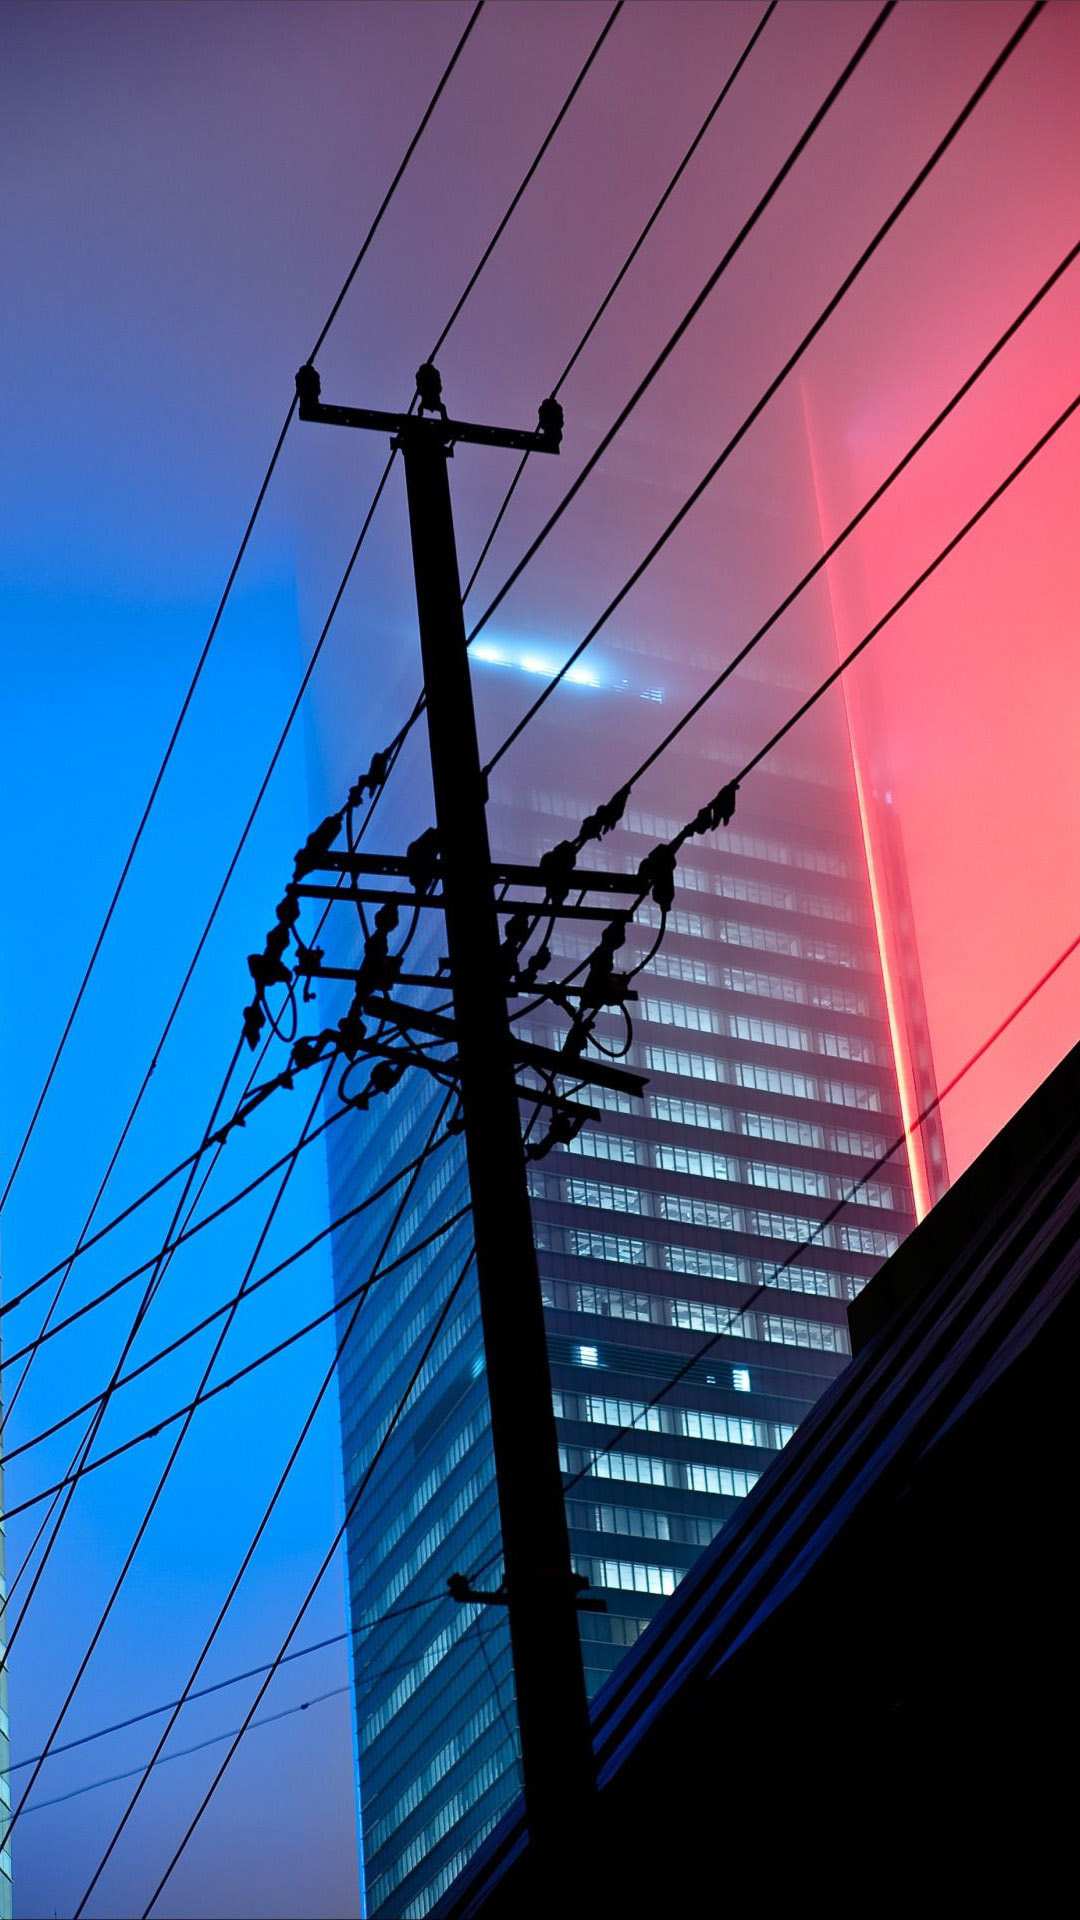 A red and blue lighted building in the distance - Night